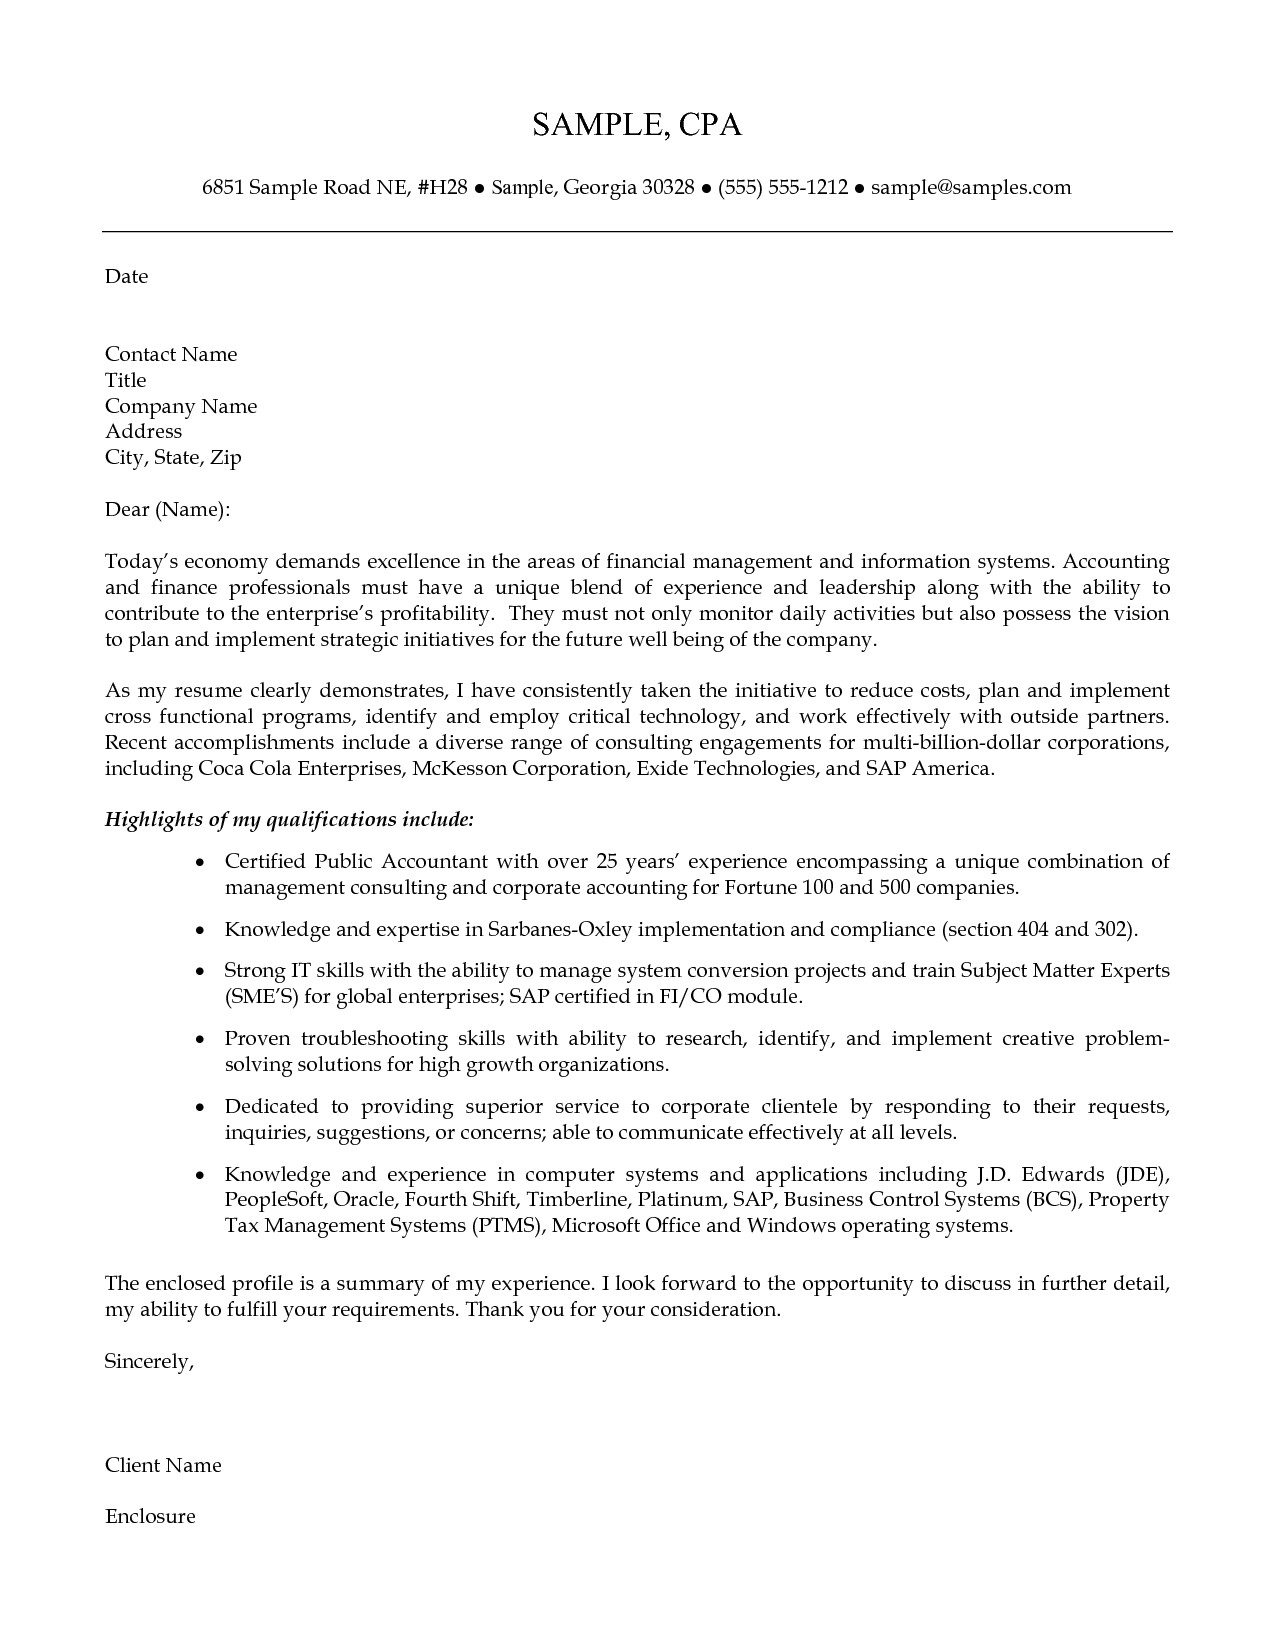 Subrogation Demand Letter Template - Save Cover Letter Sample In Ms Word format